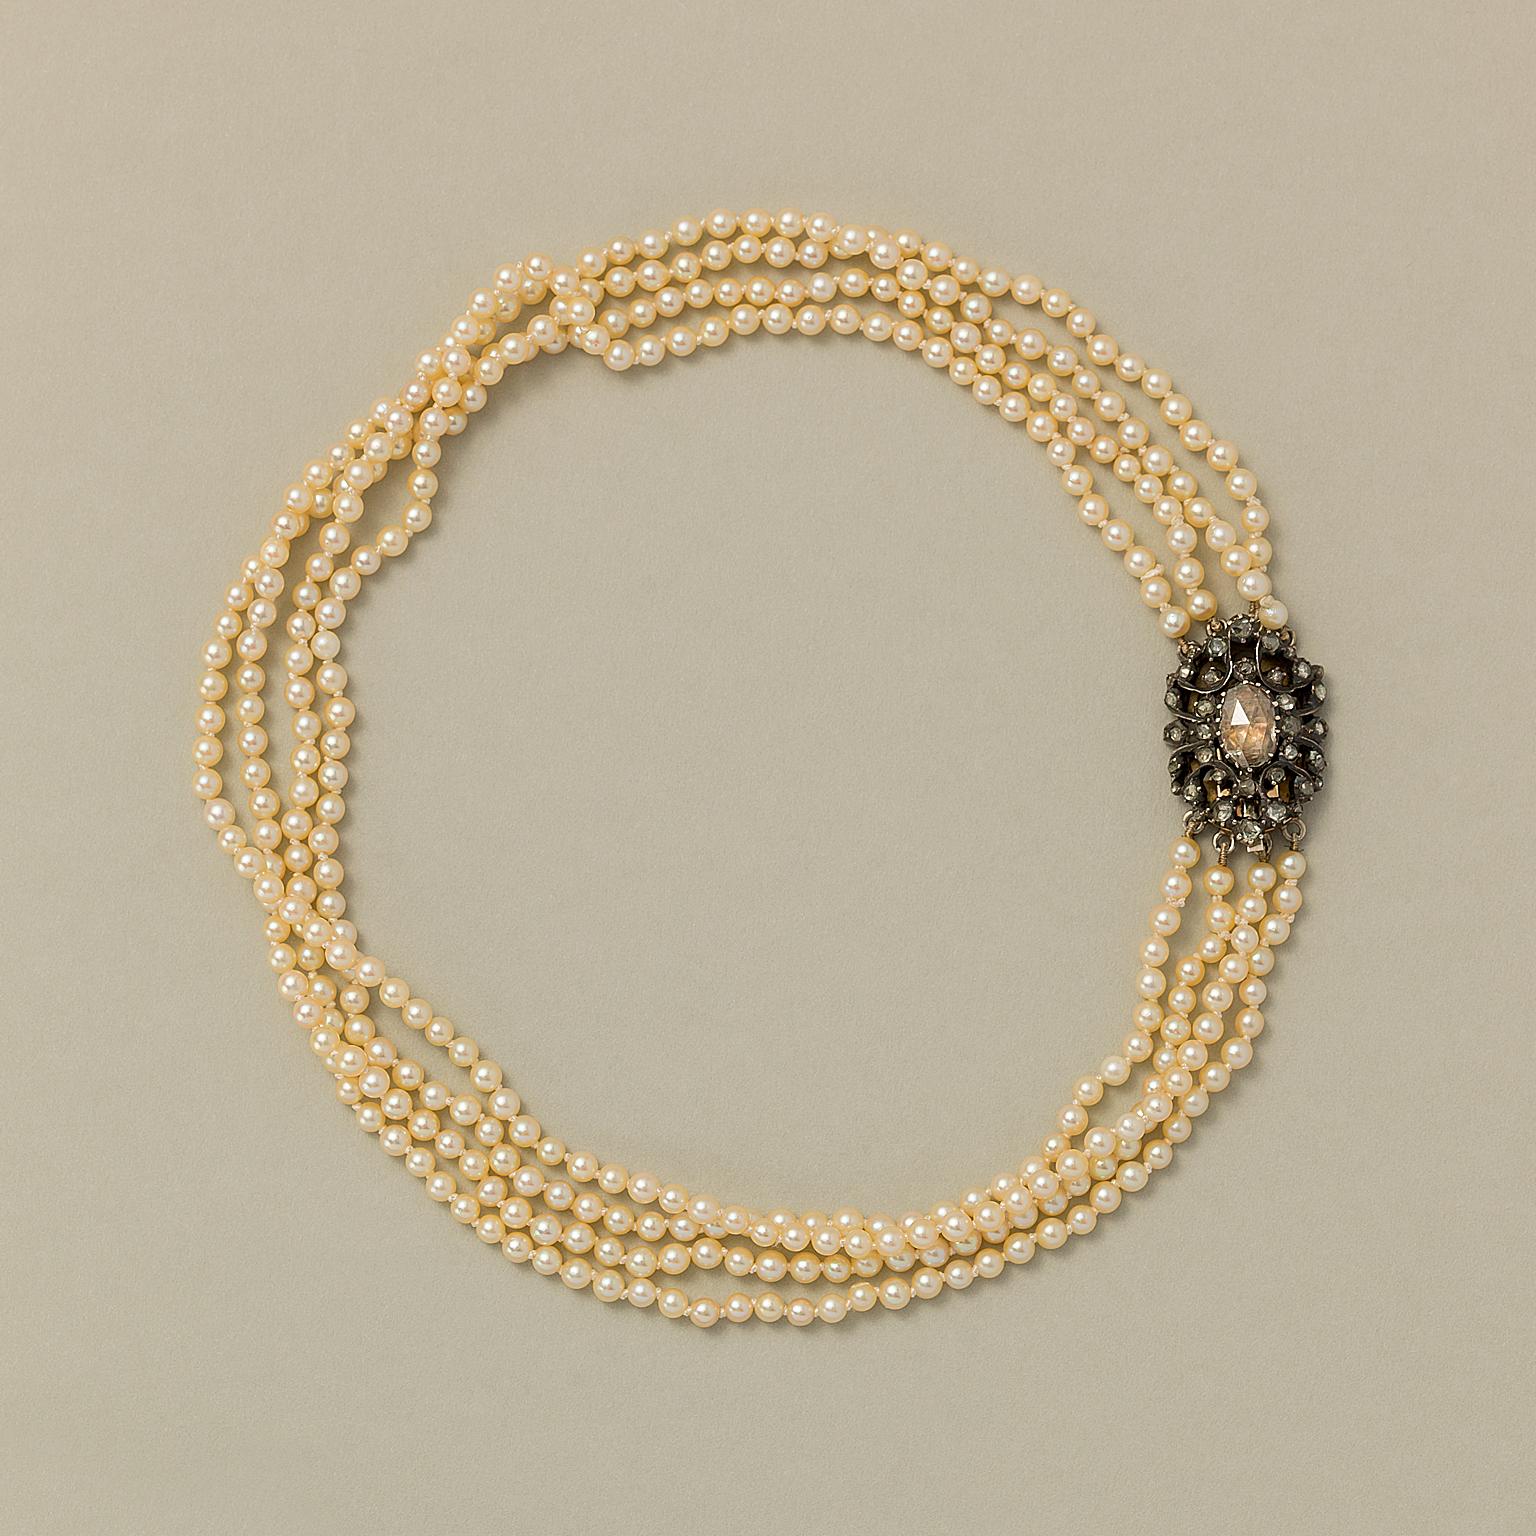 A four-row cultured pearl necklace with a 14 carat gold clasp that is made out of an antique silver and rose cut element, set with one oval rose-cut diamond (app. 9.7x 6.5 mm) and 36 small rose-cut diamonds. 

weight: 31.47 grams
length: 37.5 cm
